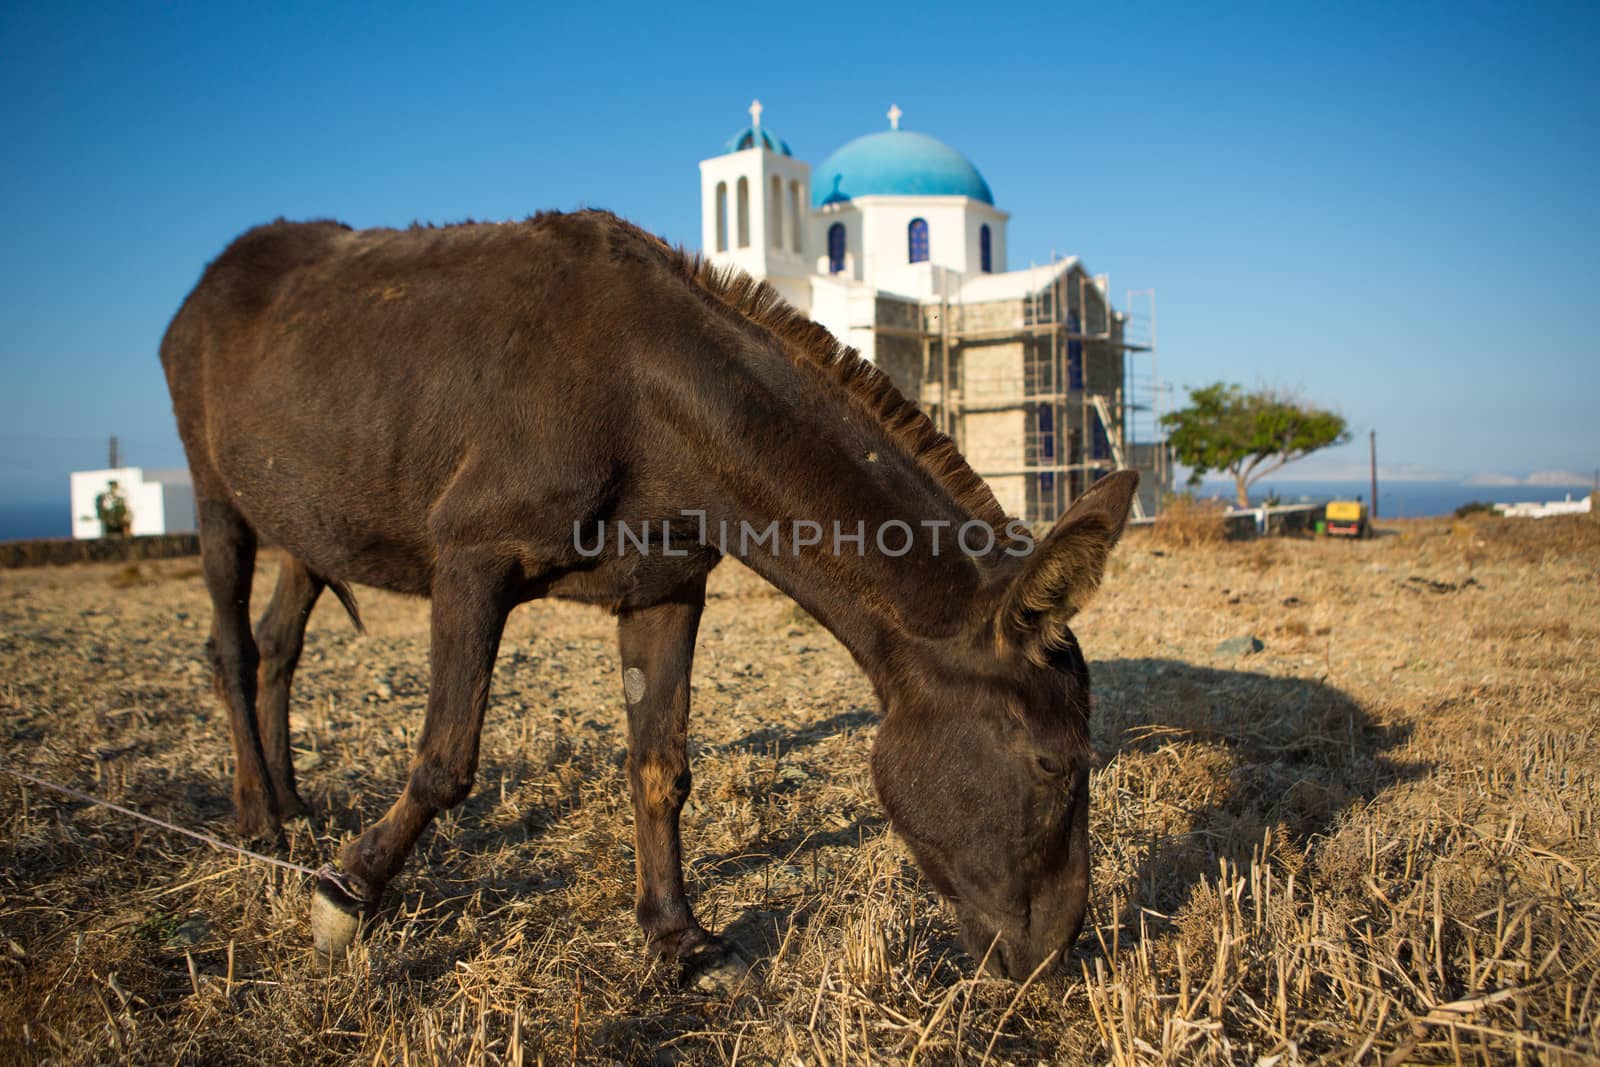 Mule  eating from the dried land at the shoreline, in the background one of the famous orthodox churches with there typical blue domes in Folegandros, Greece, 2013.